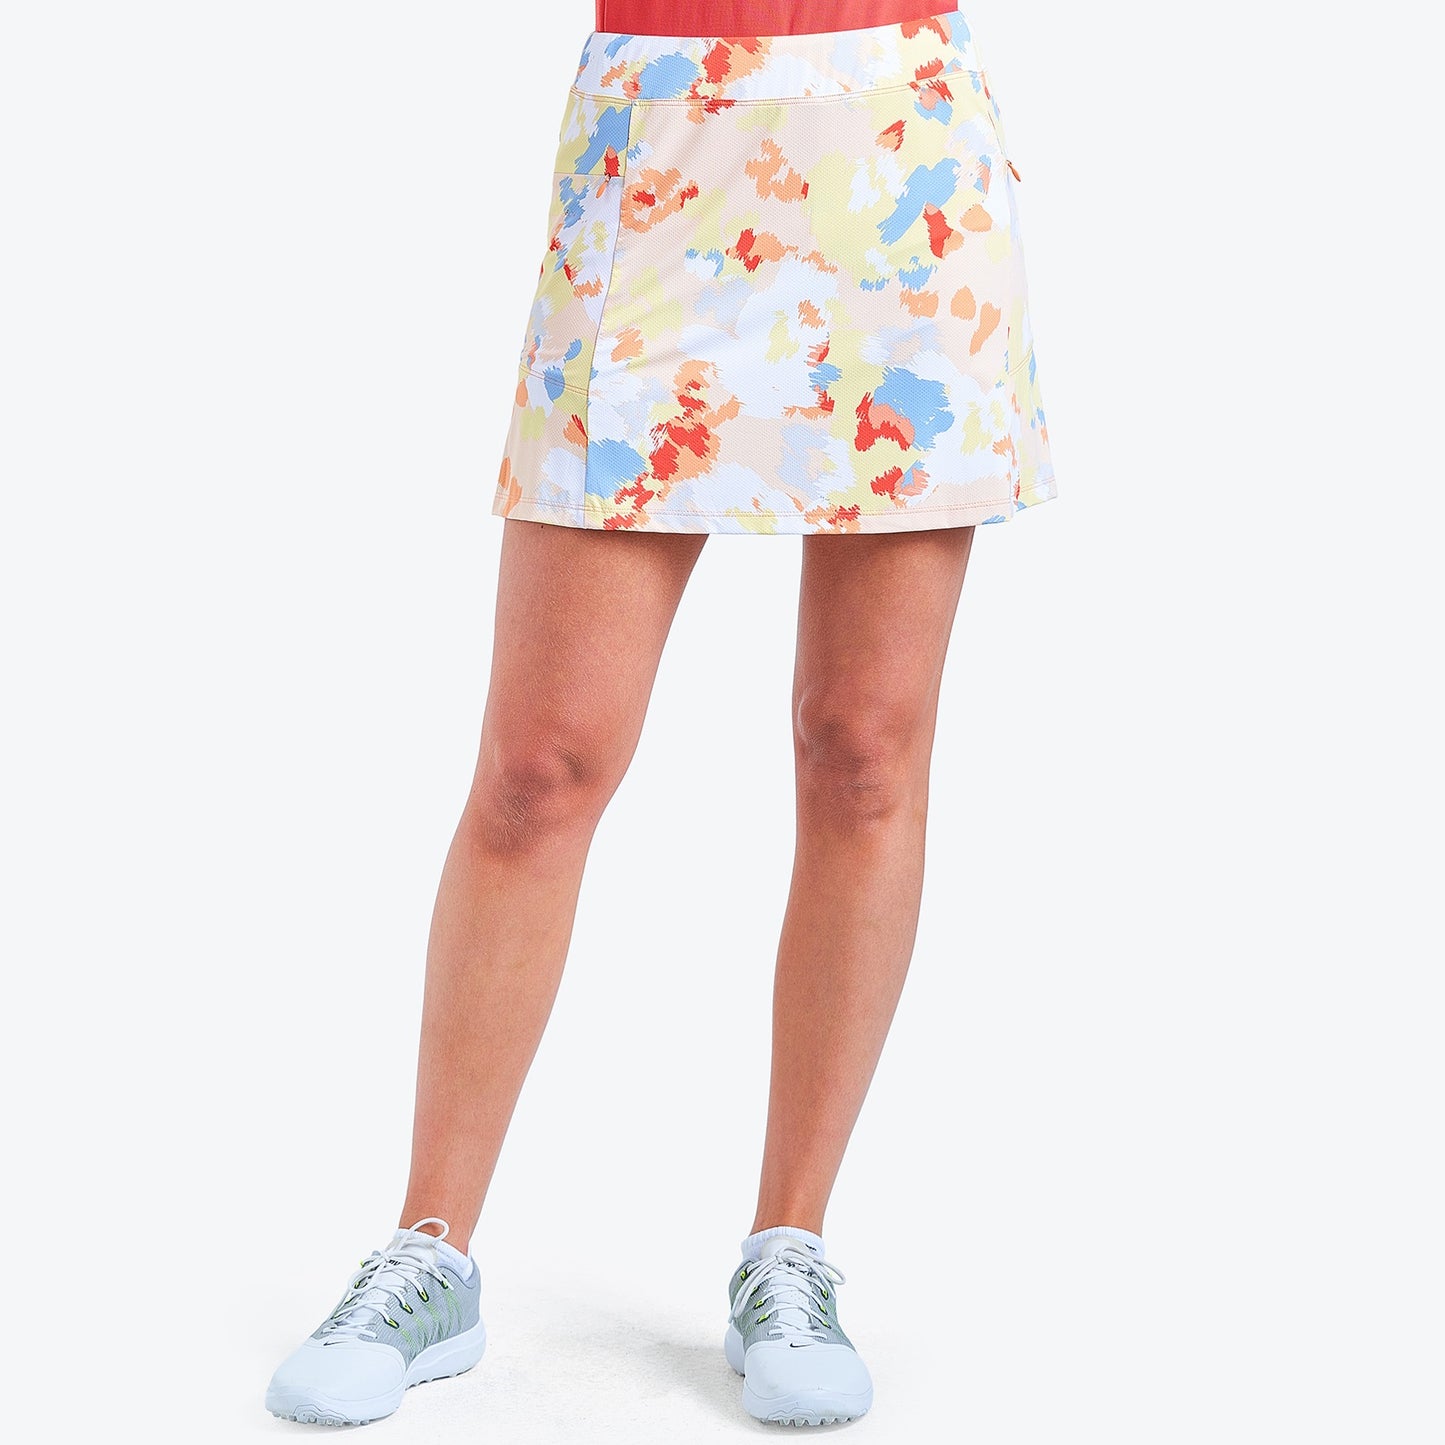 Nivo Layla Liv Cool Pull-On Skort in Mango Print Front Facing Product Image